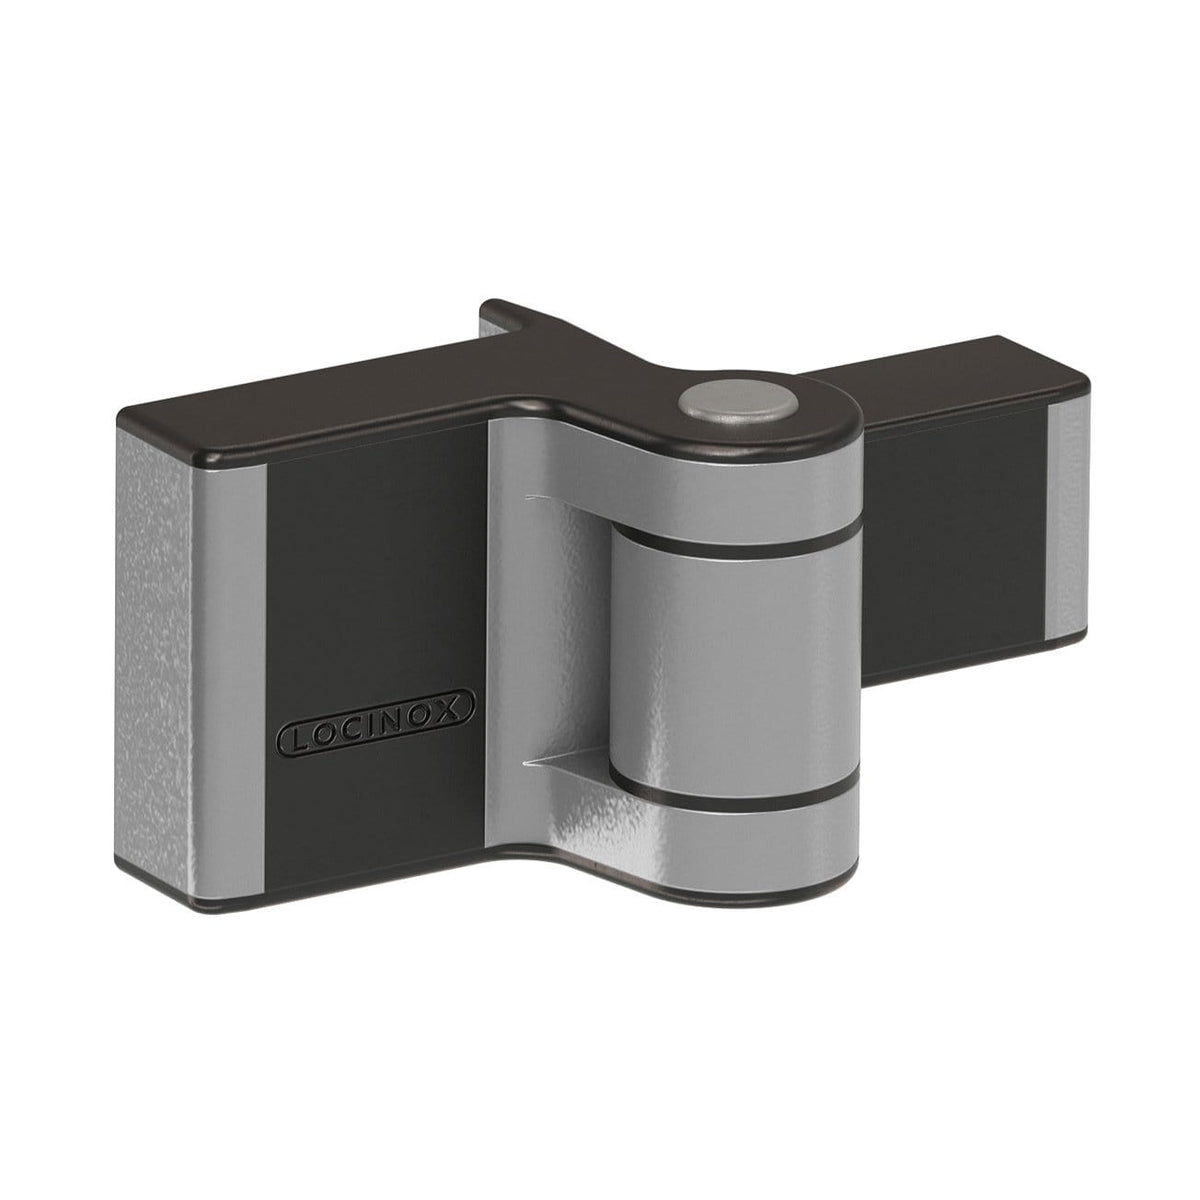 Locinox Puma - Compact 2-Way Adjustable 180° Surface Mounted Gate Hinges - For Gates Up To 132 Lb - Multiple Finishes Available - 2 Pack